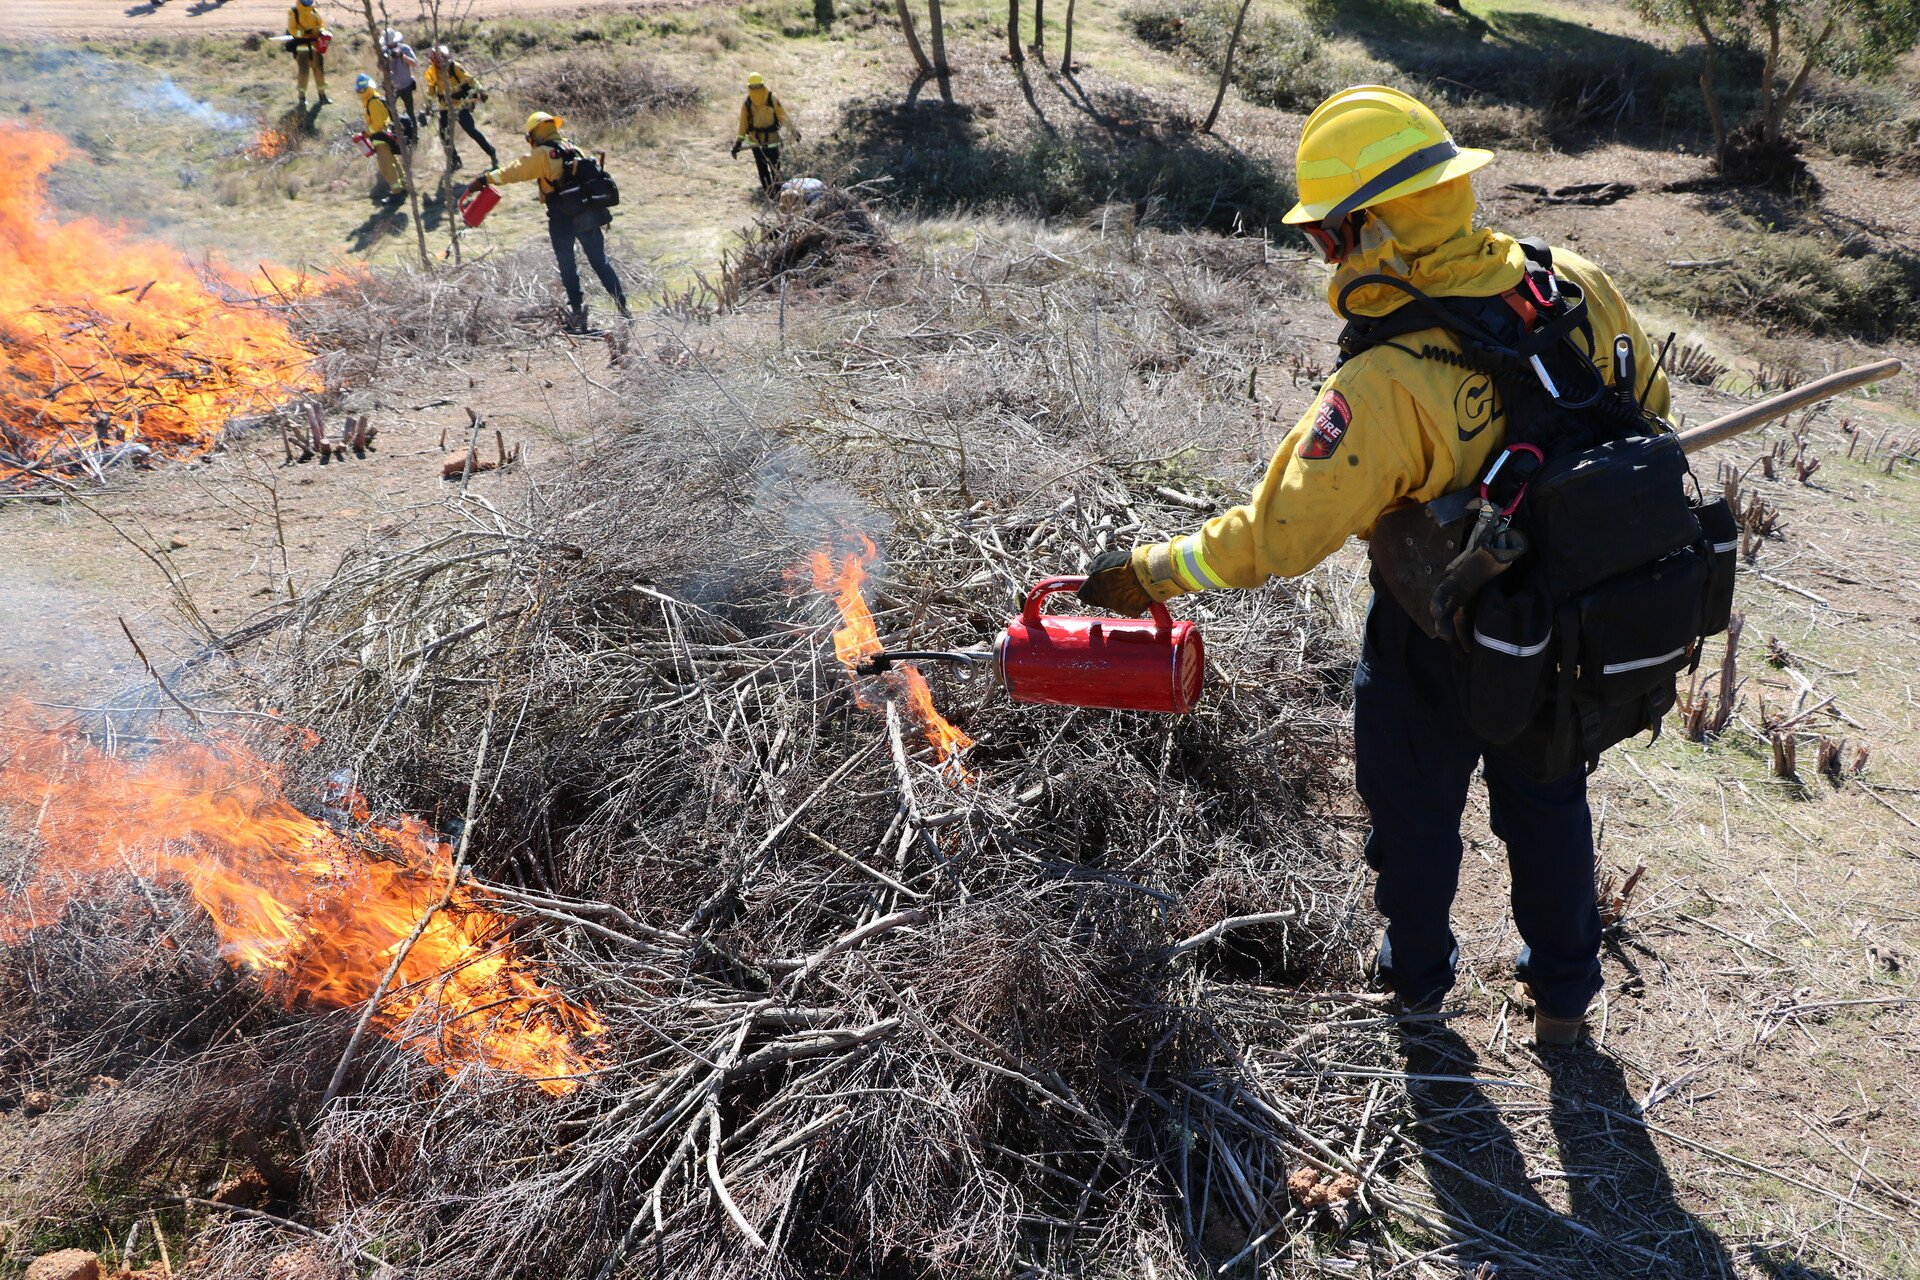 A firefighter in a yellow uniform drips flame from a torch onto a pile of brush. 